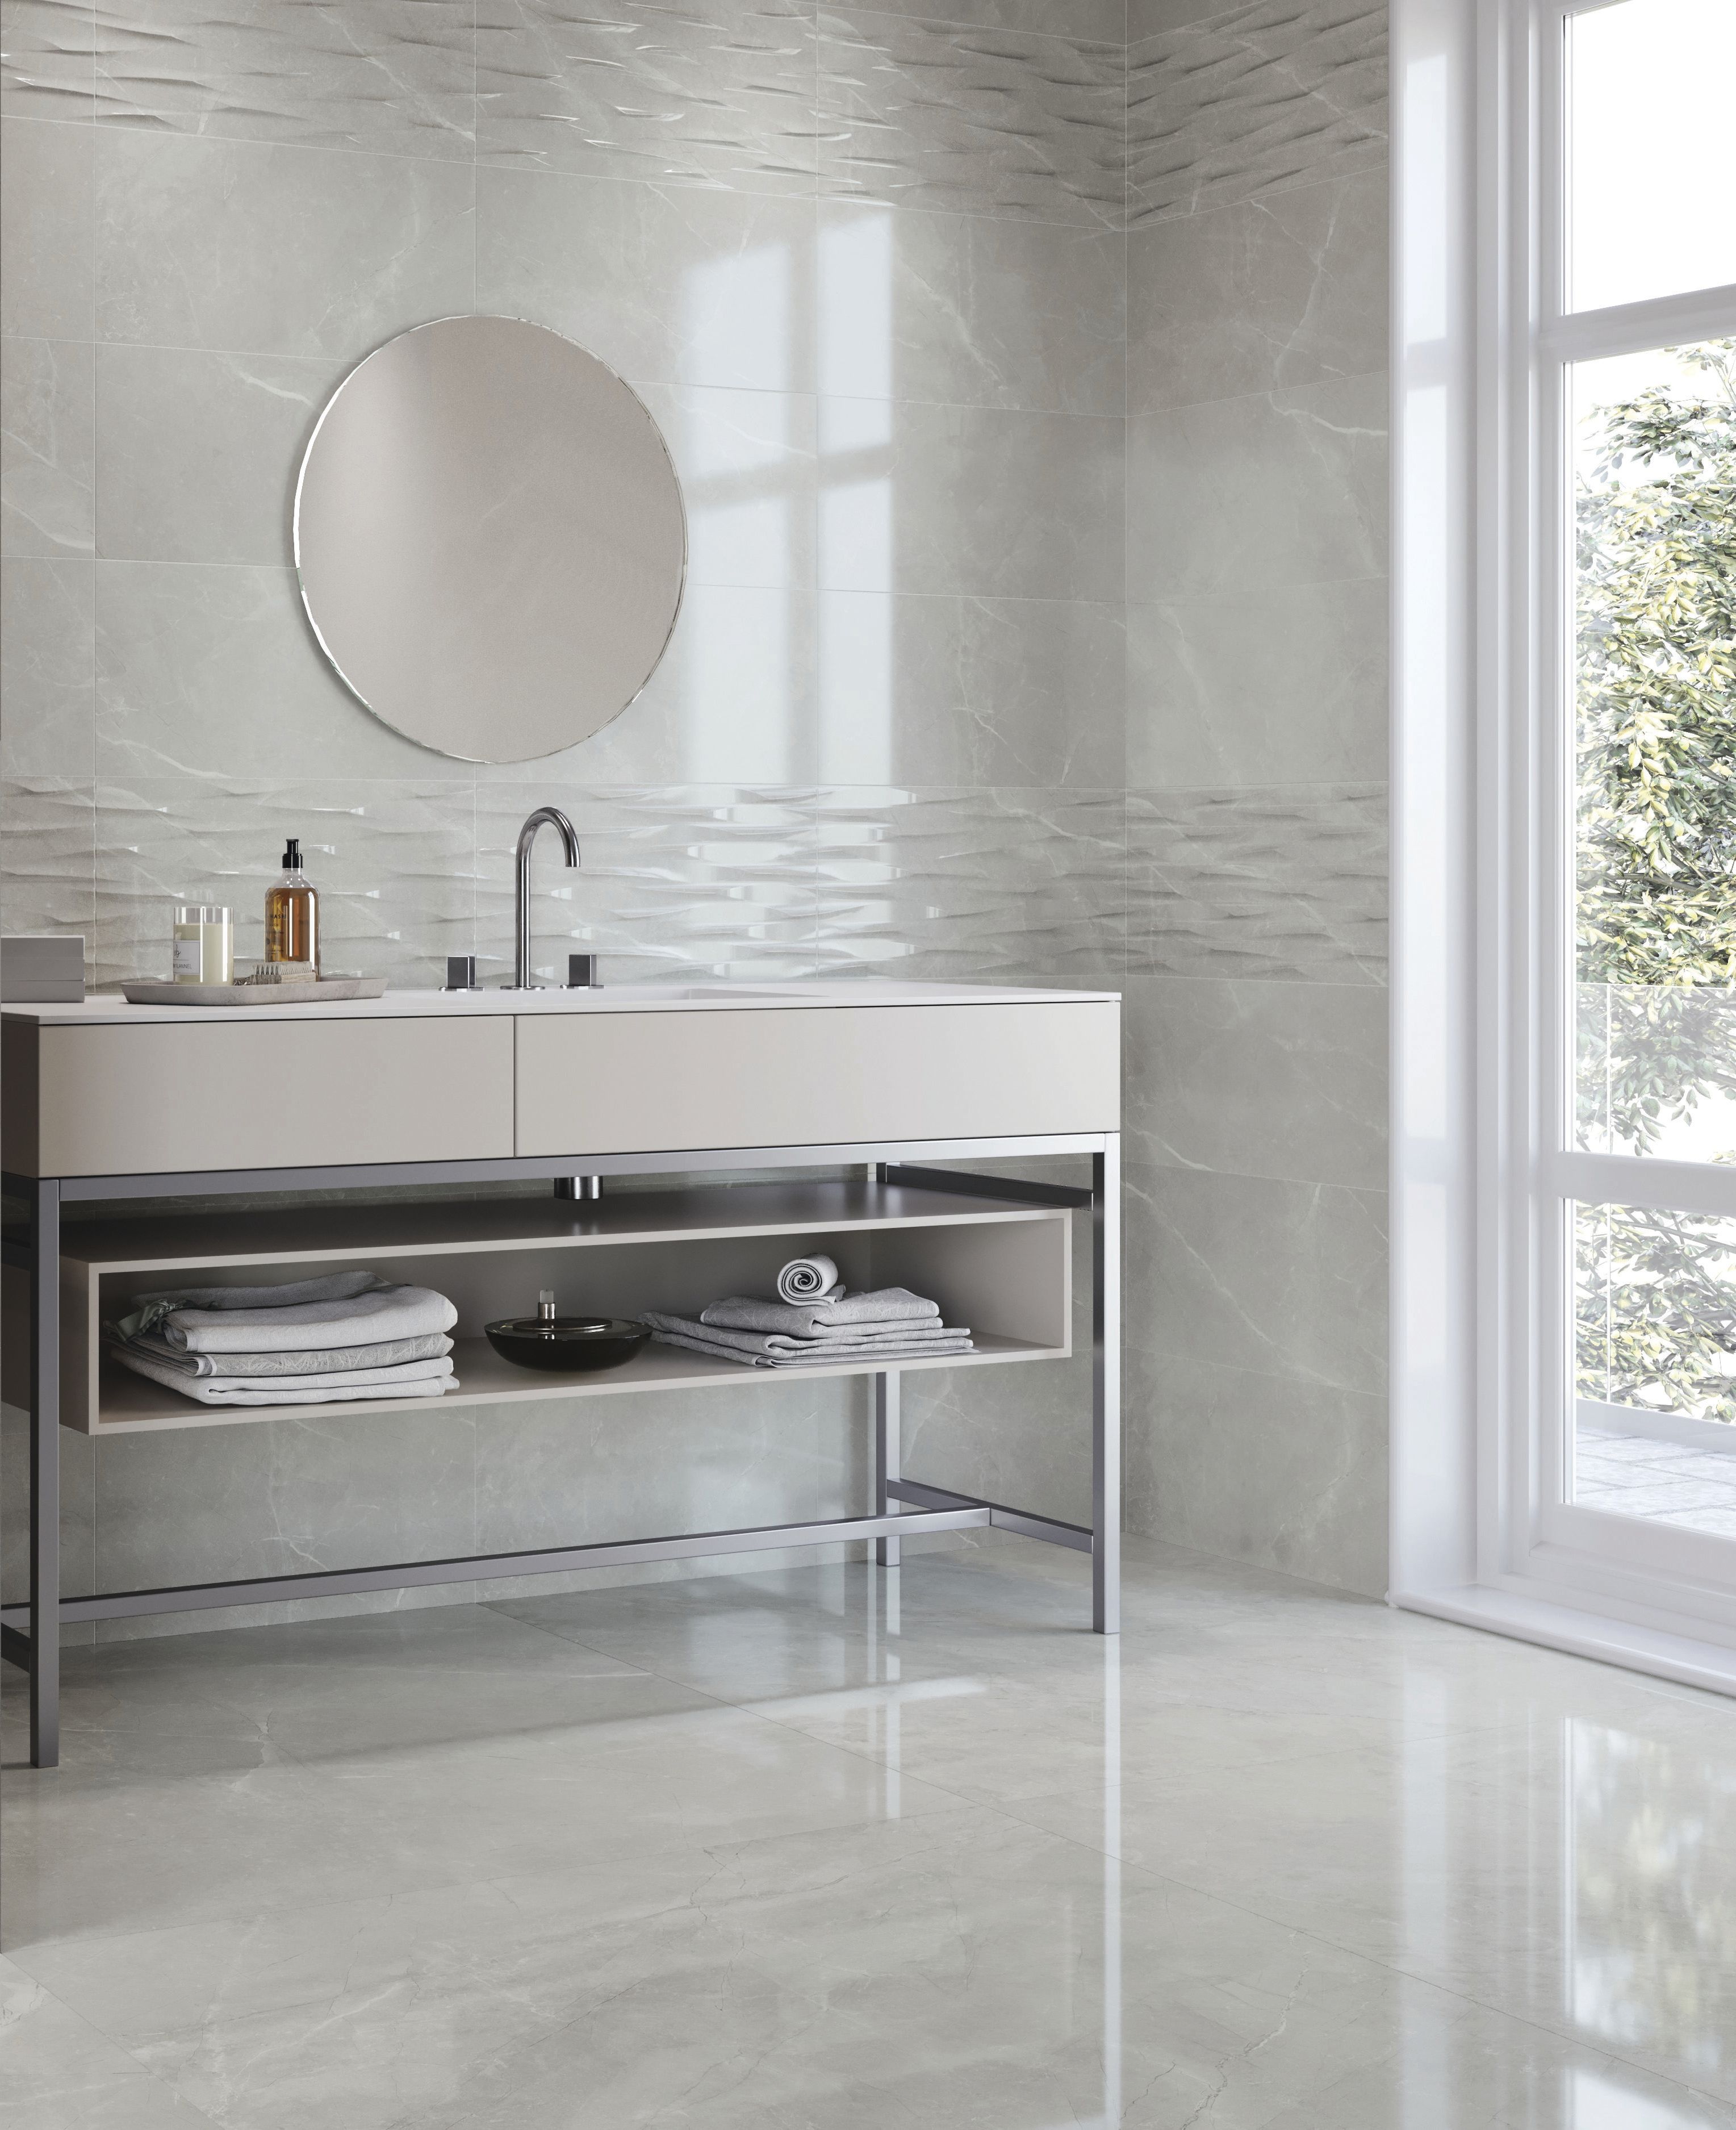 Image of Wickes Boutique Bukan Silver Glazed Porcelain Wall & Floor Tile - 600 x 600mm